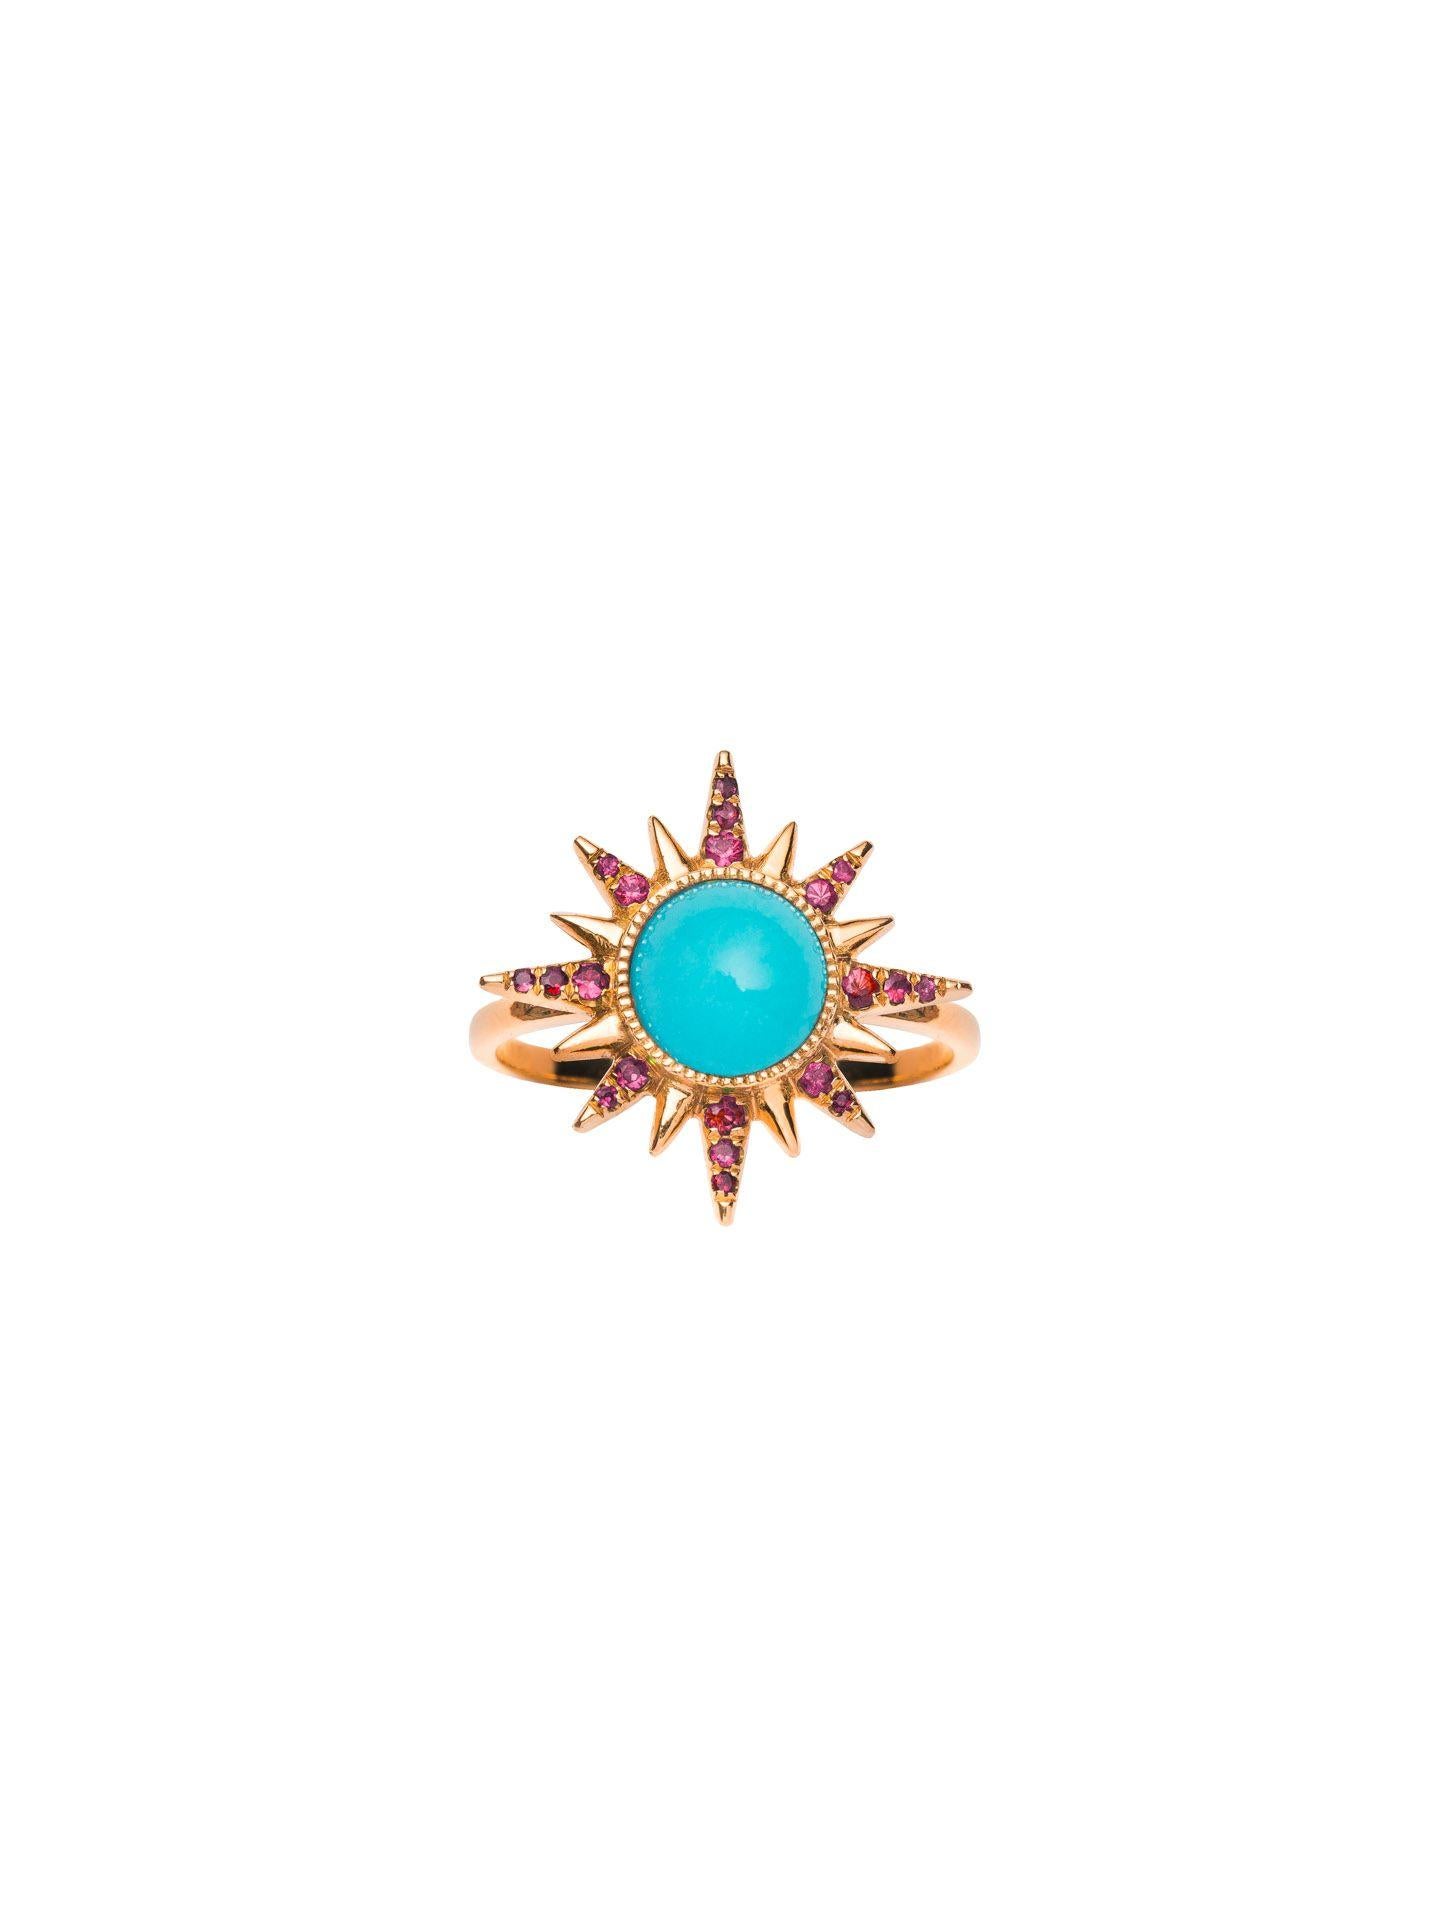 Electra Maxima Ring

18kt rose gold, 1.80 ct Turquoise round cabochon, 0.23 ct Rubies, 5.25 gr total gold.
Sizes between 48 and 56.
Handmade in Italy.
*Due to Covid-19 situation, we may have delivery delays.

Item part of our Pleiadee collection

In